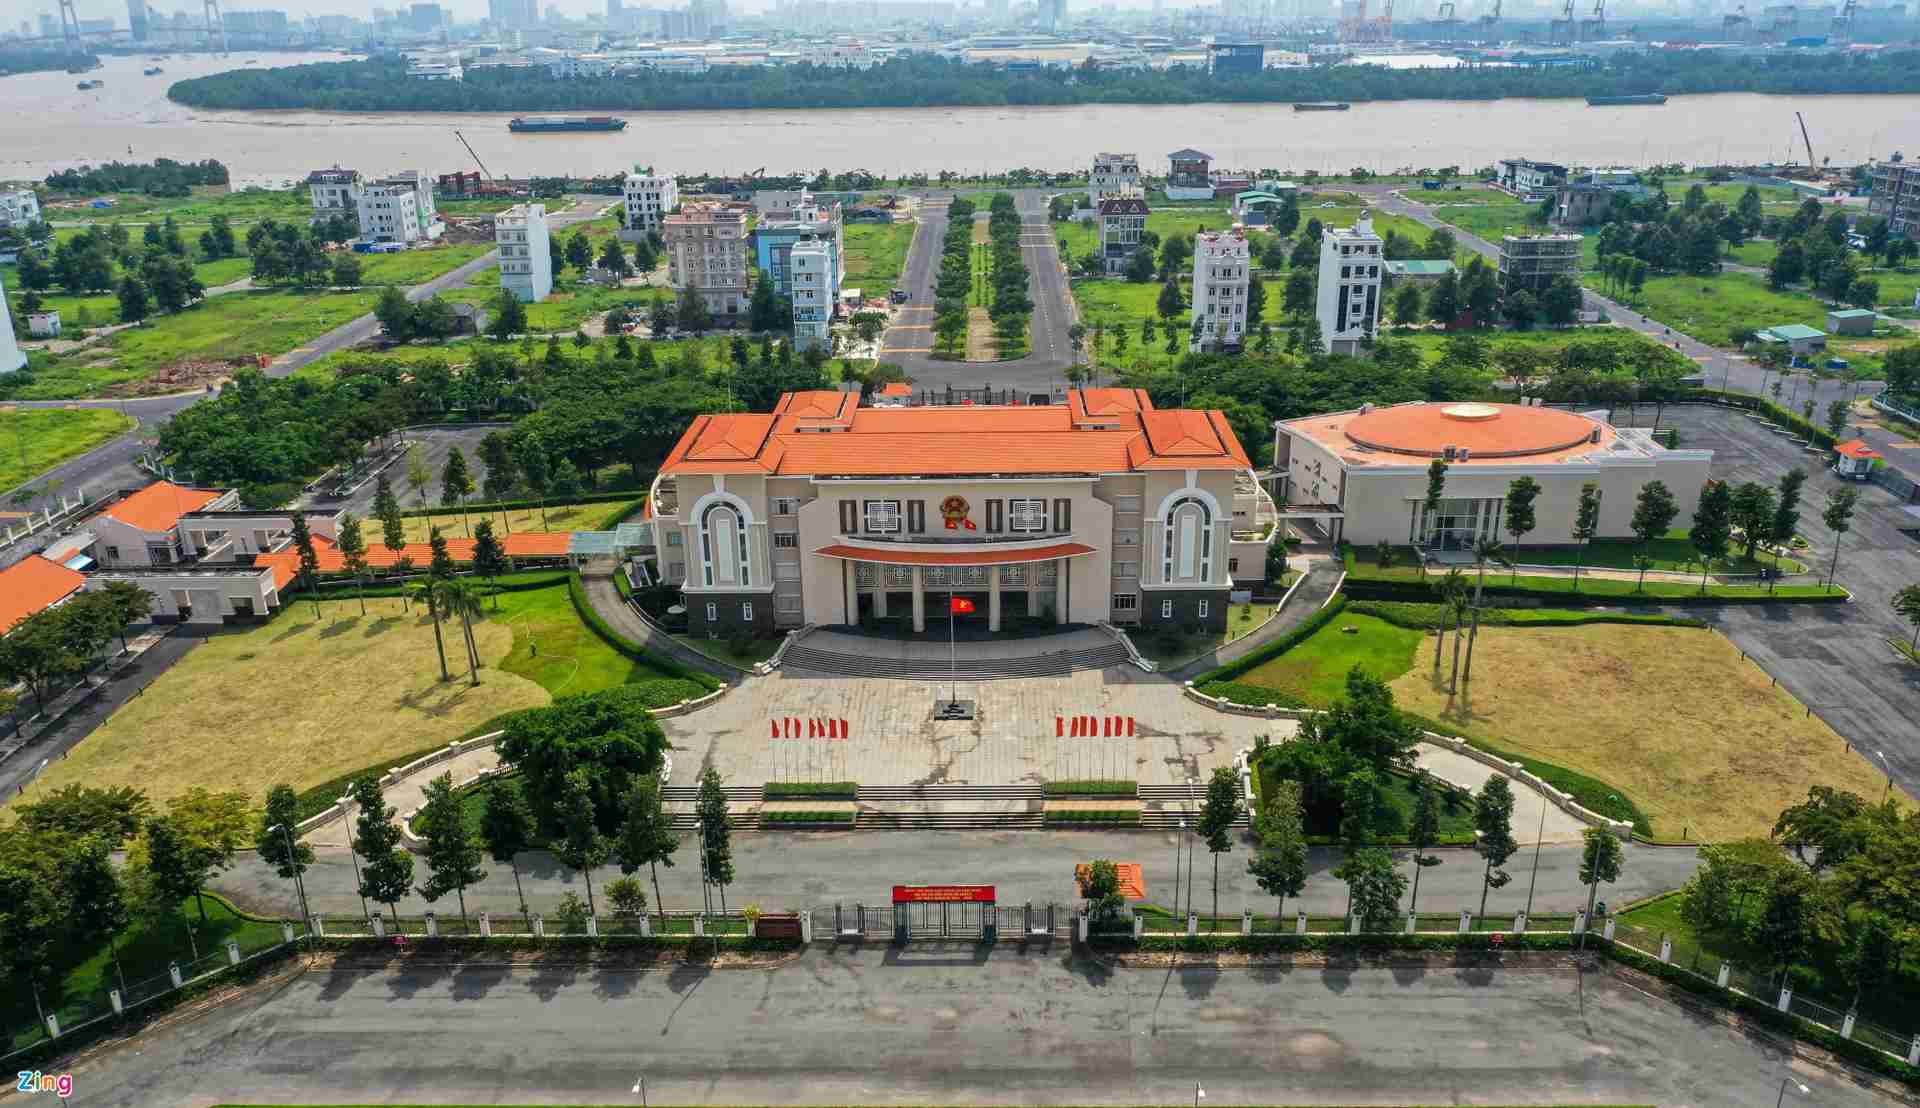 The headquarters of Thu Duc City Party Committee is expected to be located in the administrative area of District 2